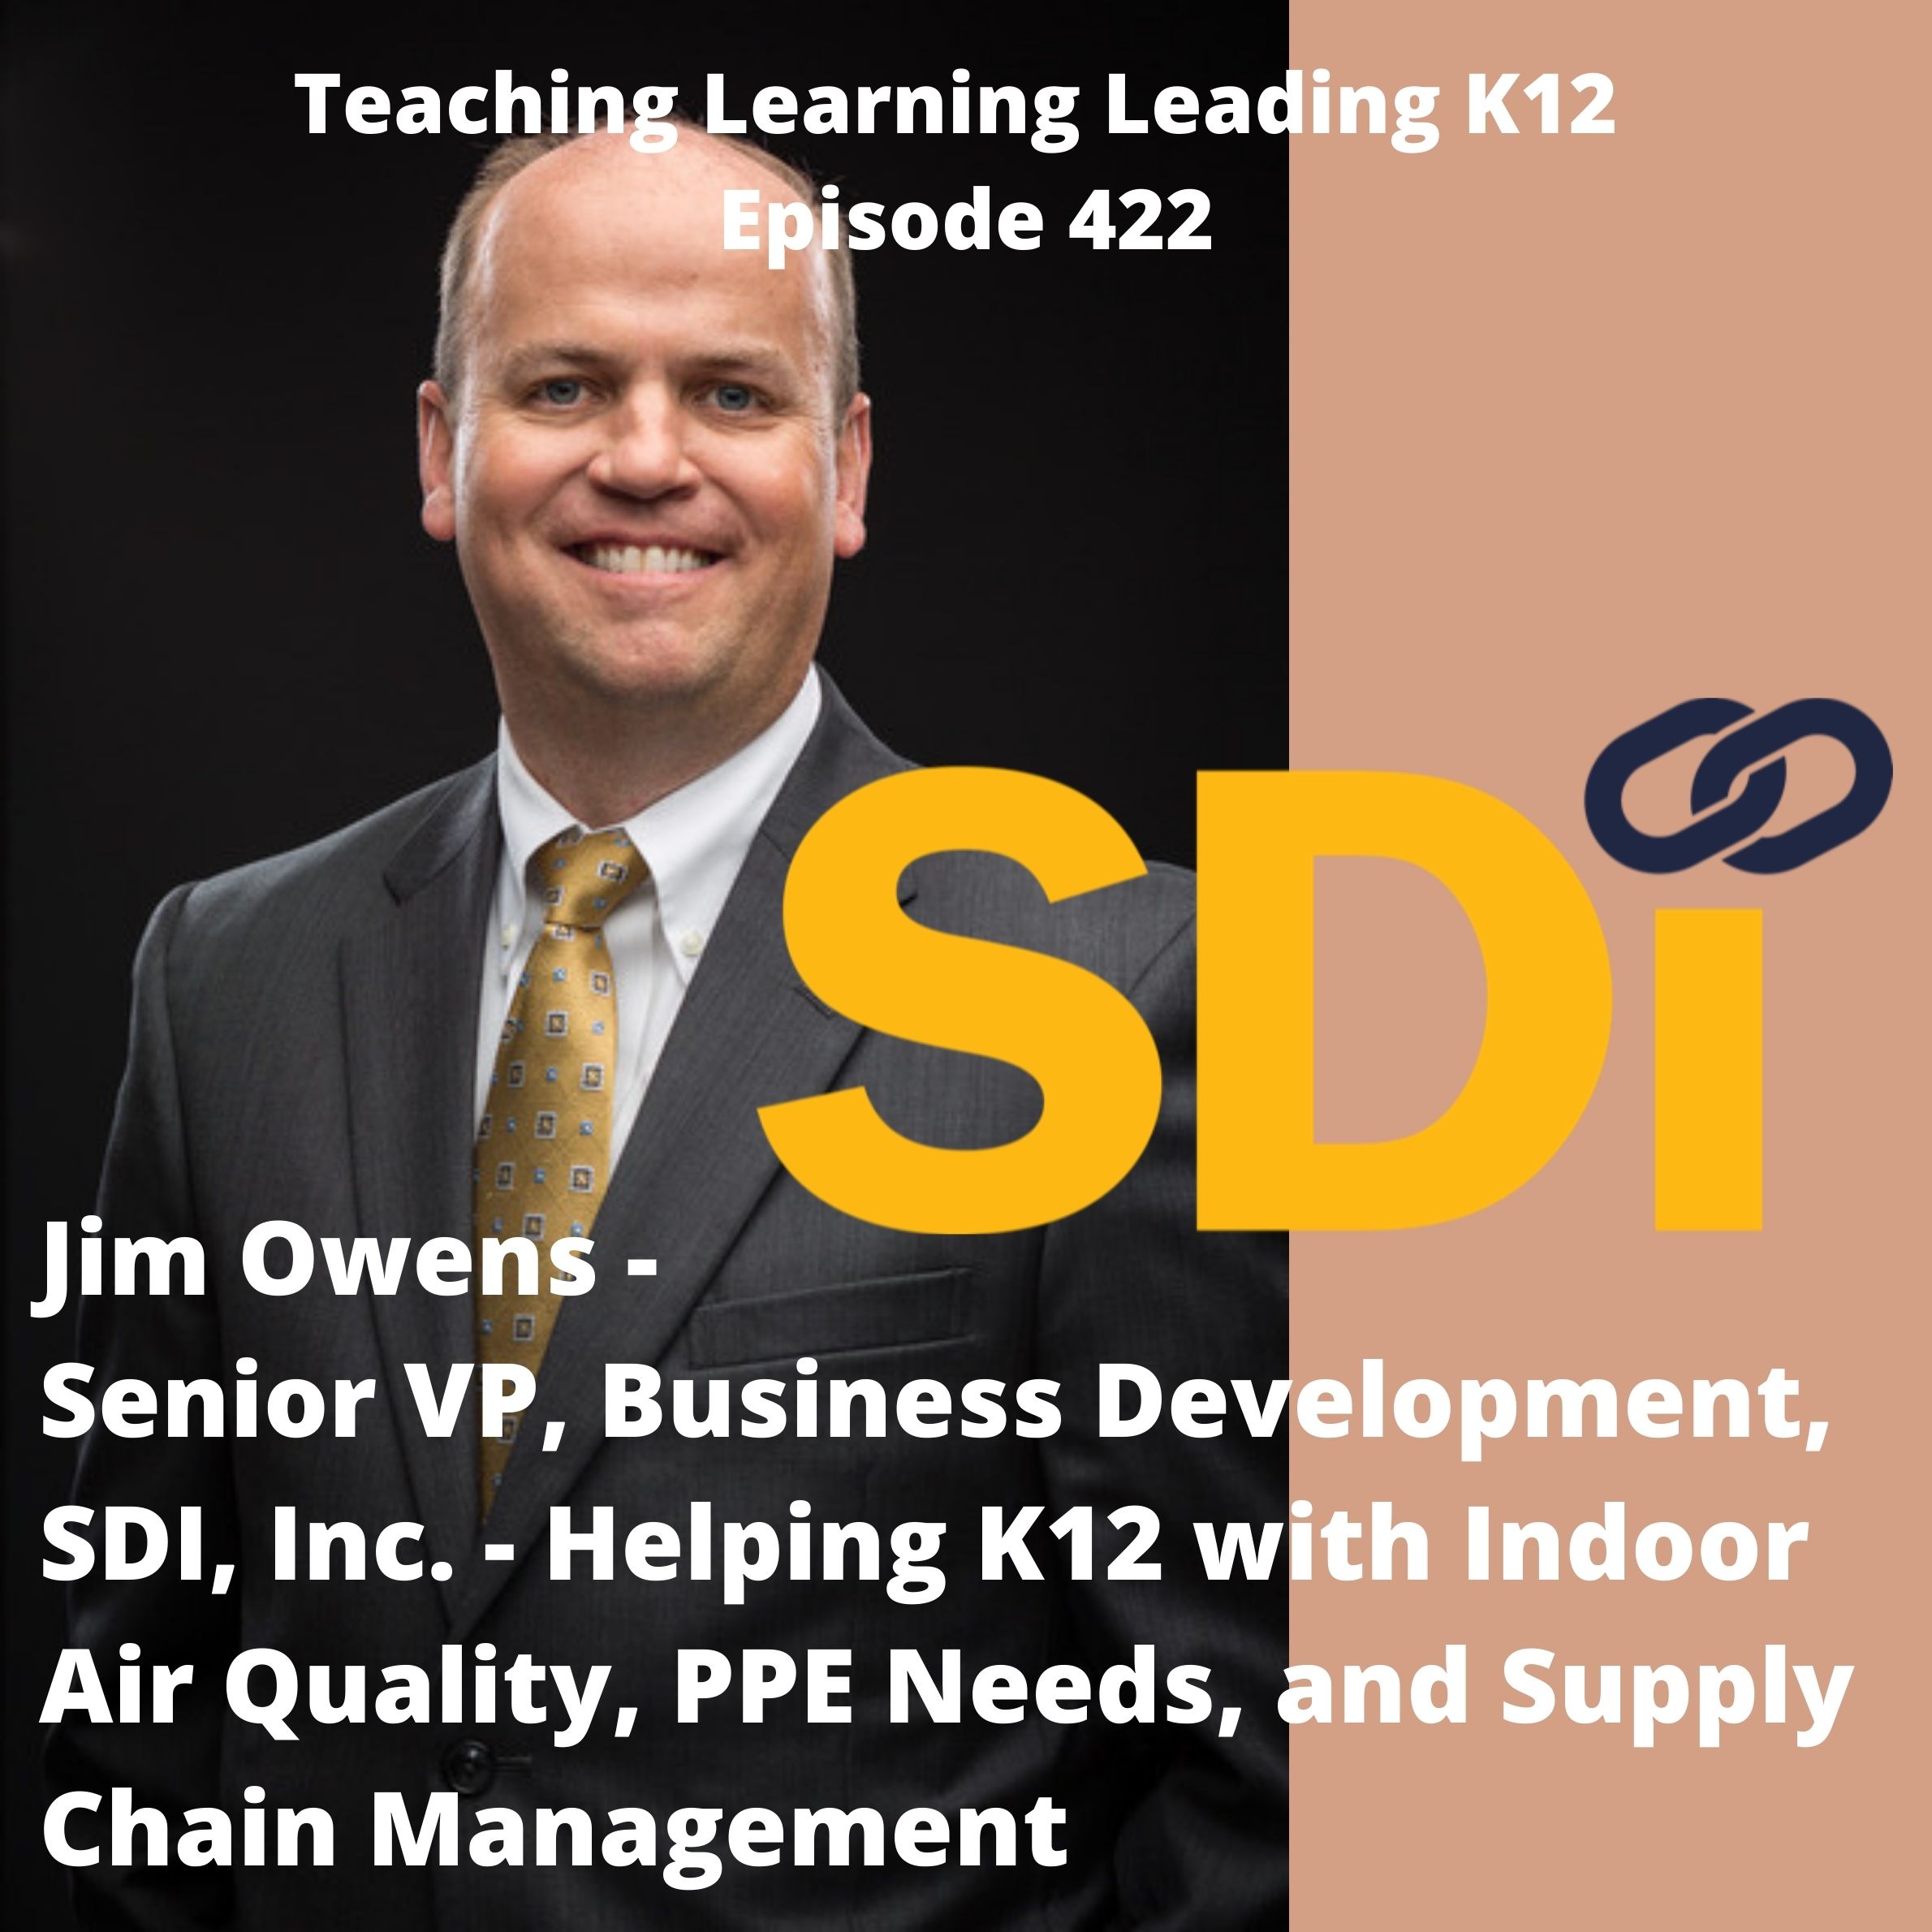 Jim Owens - Senior VP, Business Development - SDI,Inc. - Helping K12 with Indoor Air Quality, PPE Needs, and Supply Chain Management - 422 Image